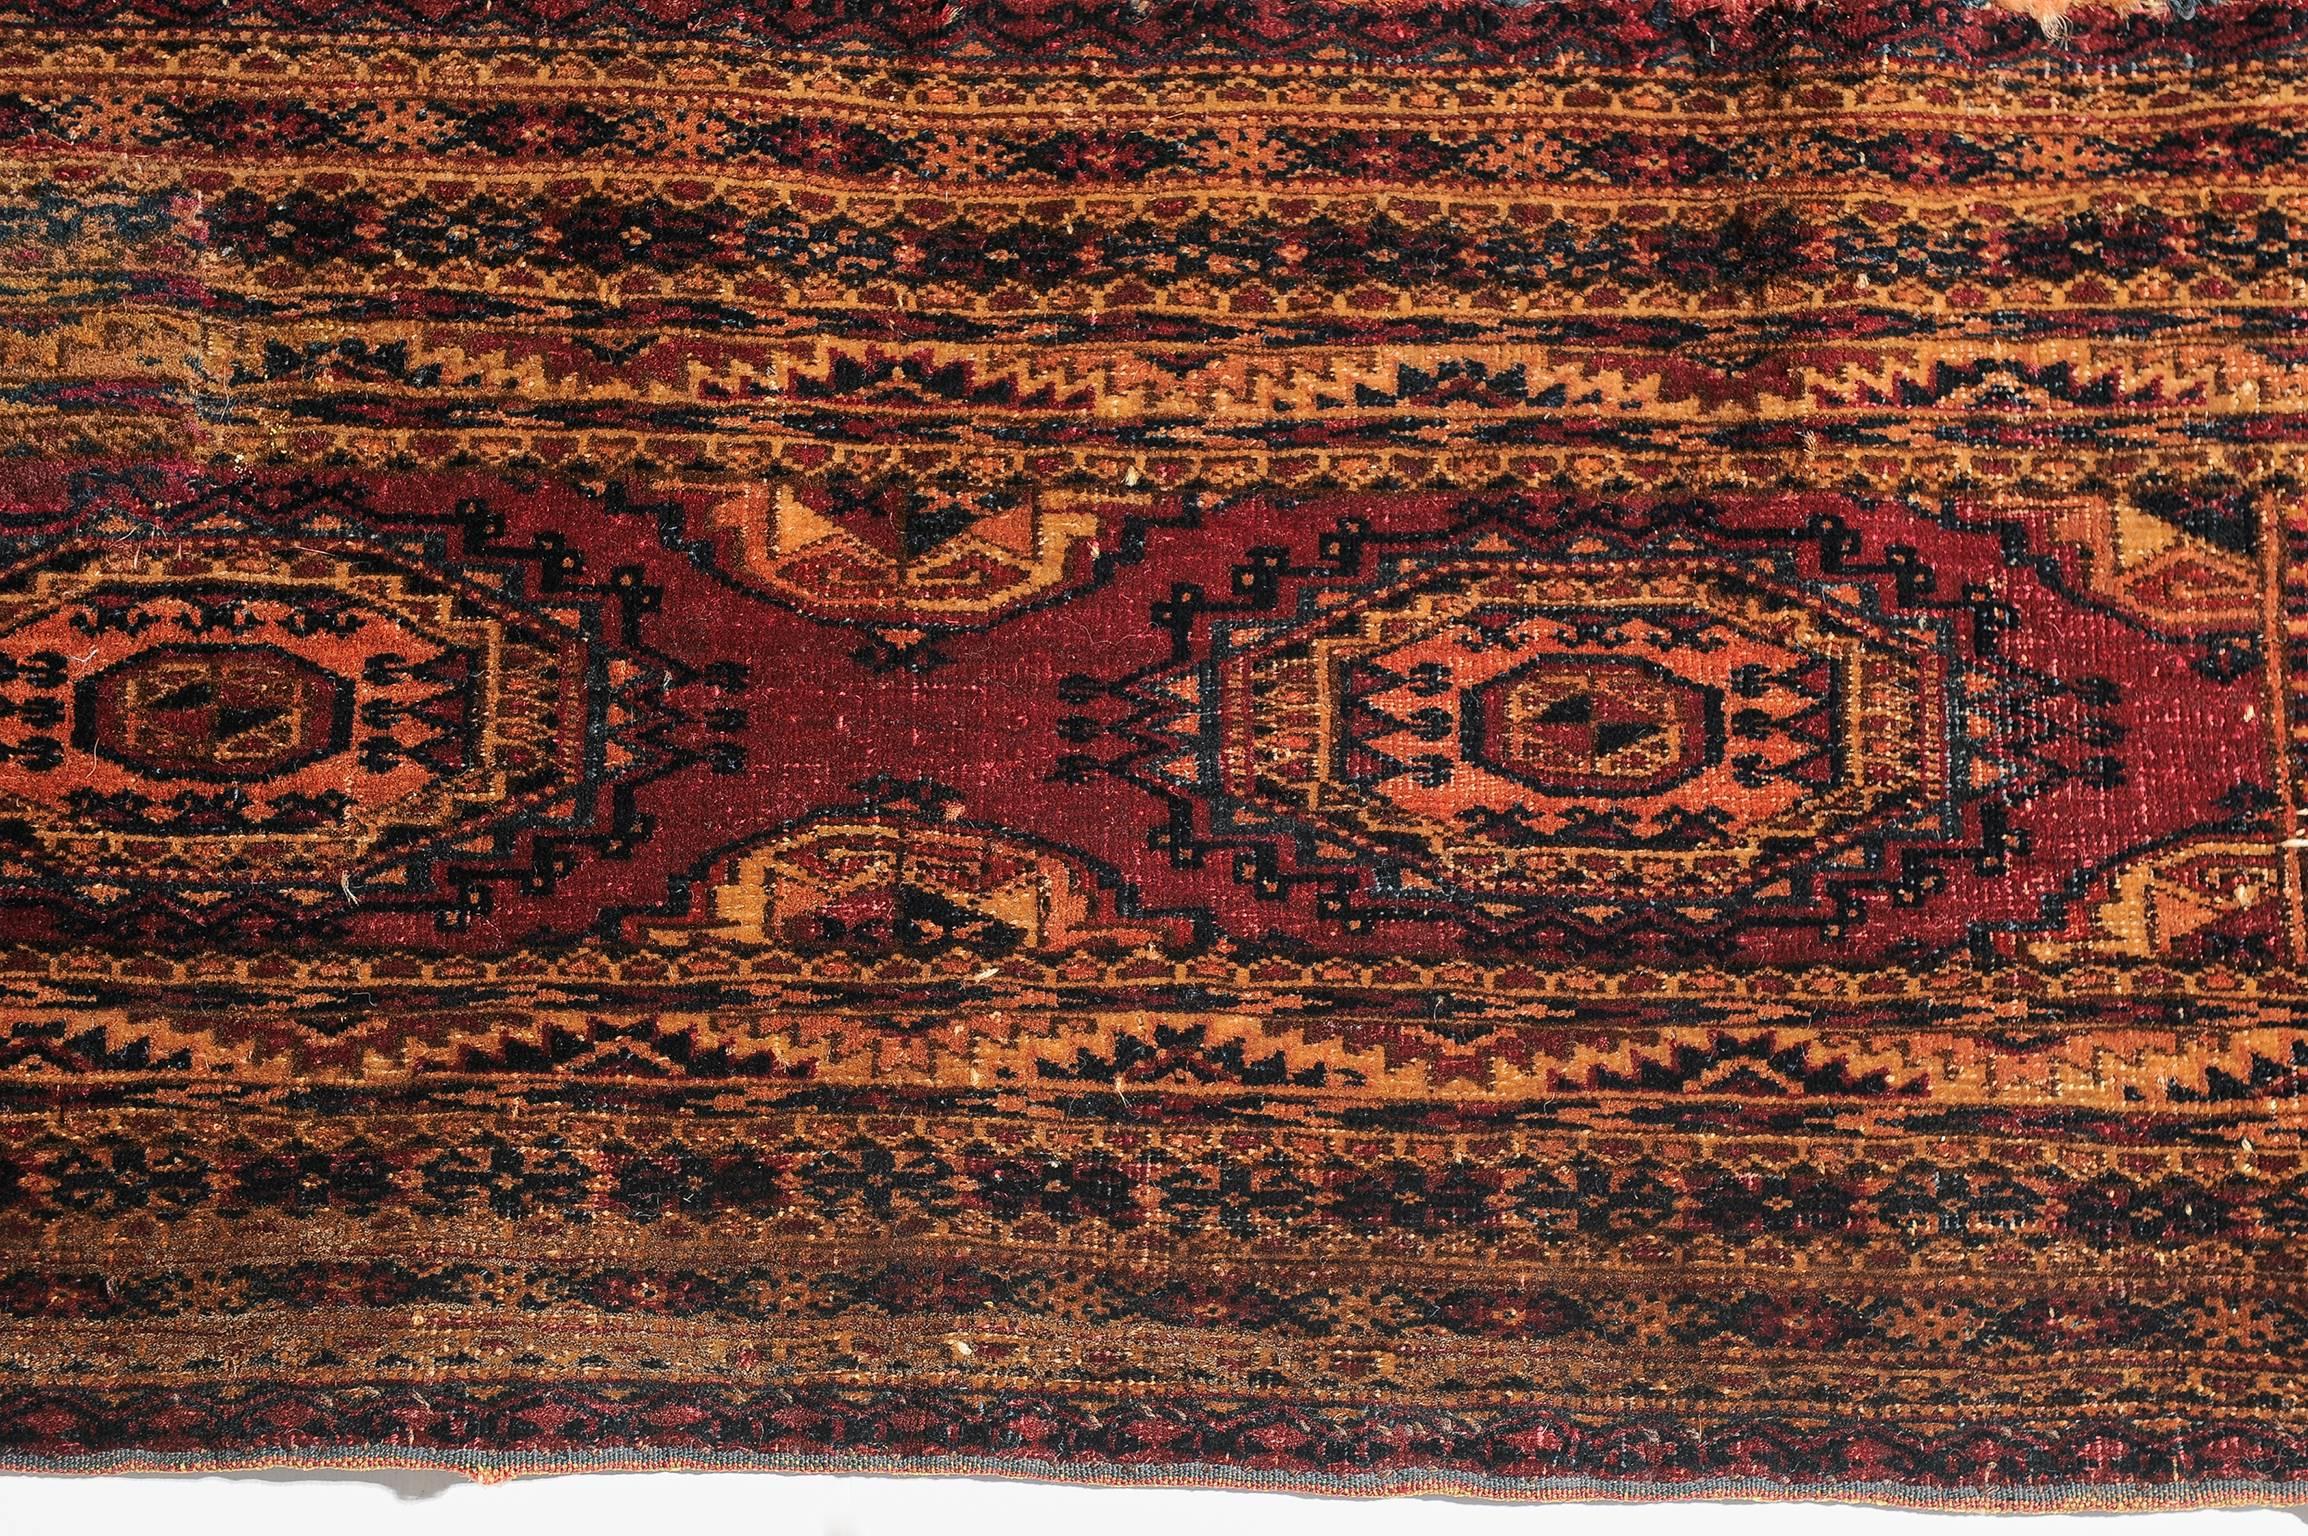 Antique rare Turkoman Torba bag with guls (roses) used by Turkoman tribes.
There are many books on the whole history of these famous little nomadic carpets. This one is perfect for wall, naturally, because it is intact rare still with its fringes.